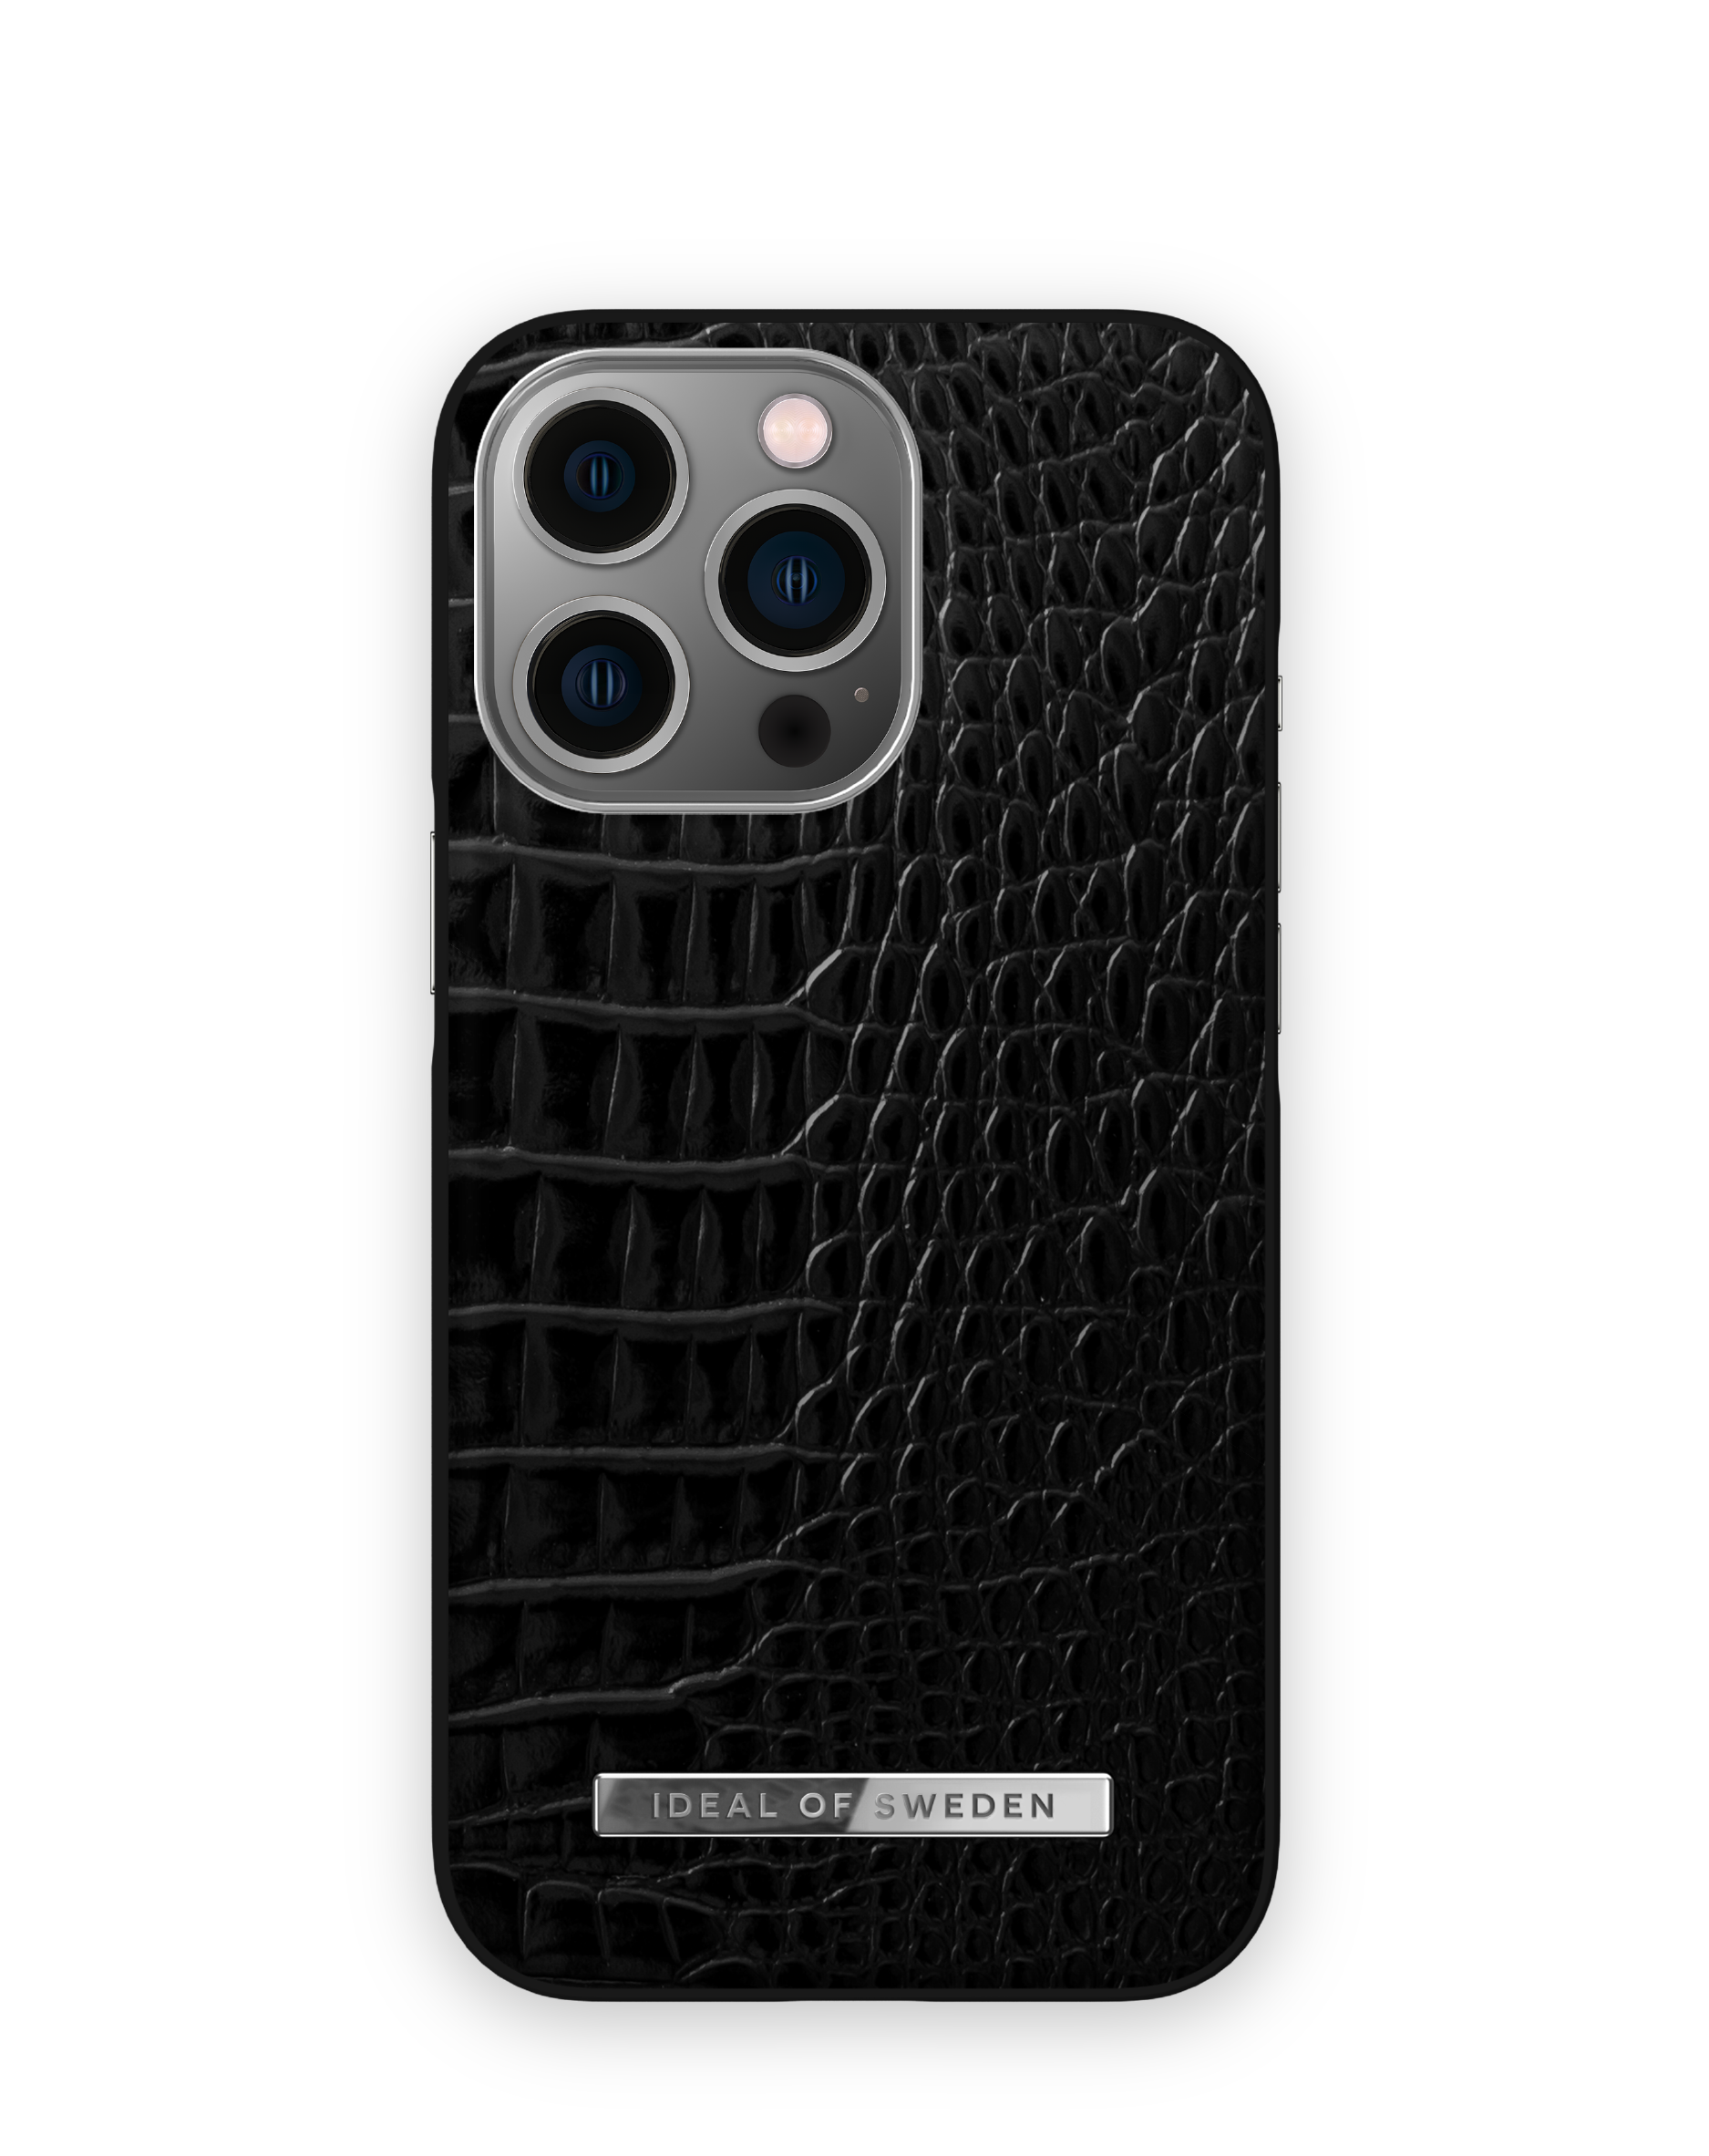 OF Silver Croco IDEAL Neo Pro, Apple, iPhone IDACSS21-I2161P-306, 13 Backcover, SWEDEN Noir